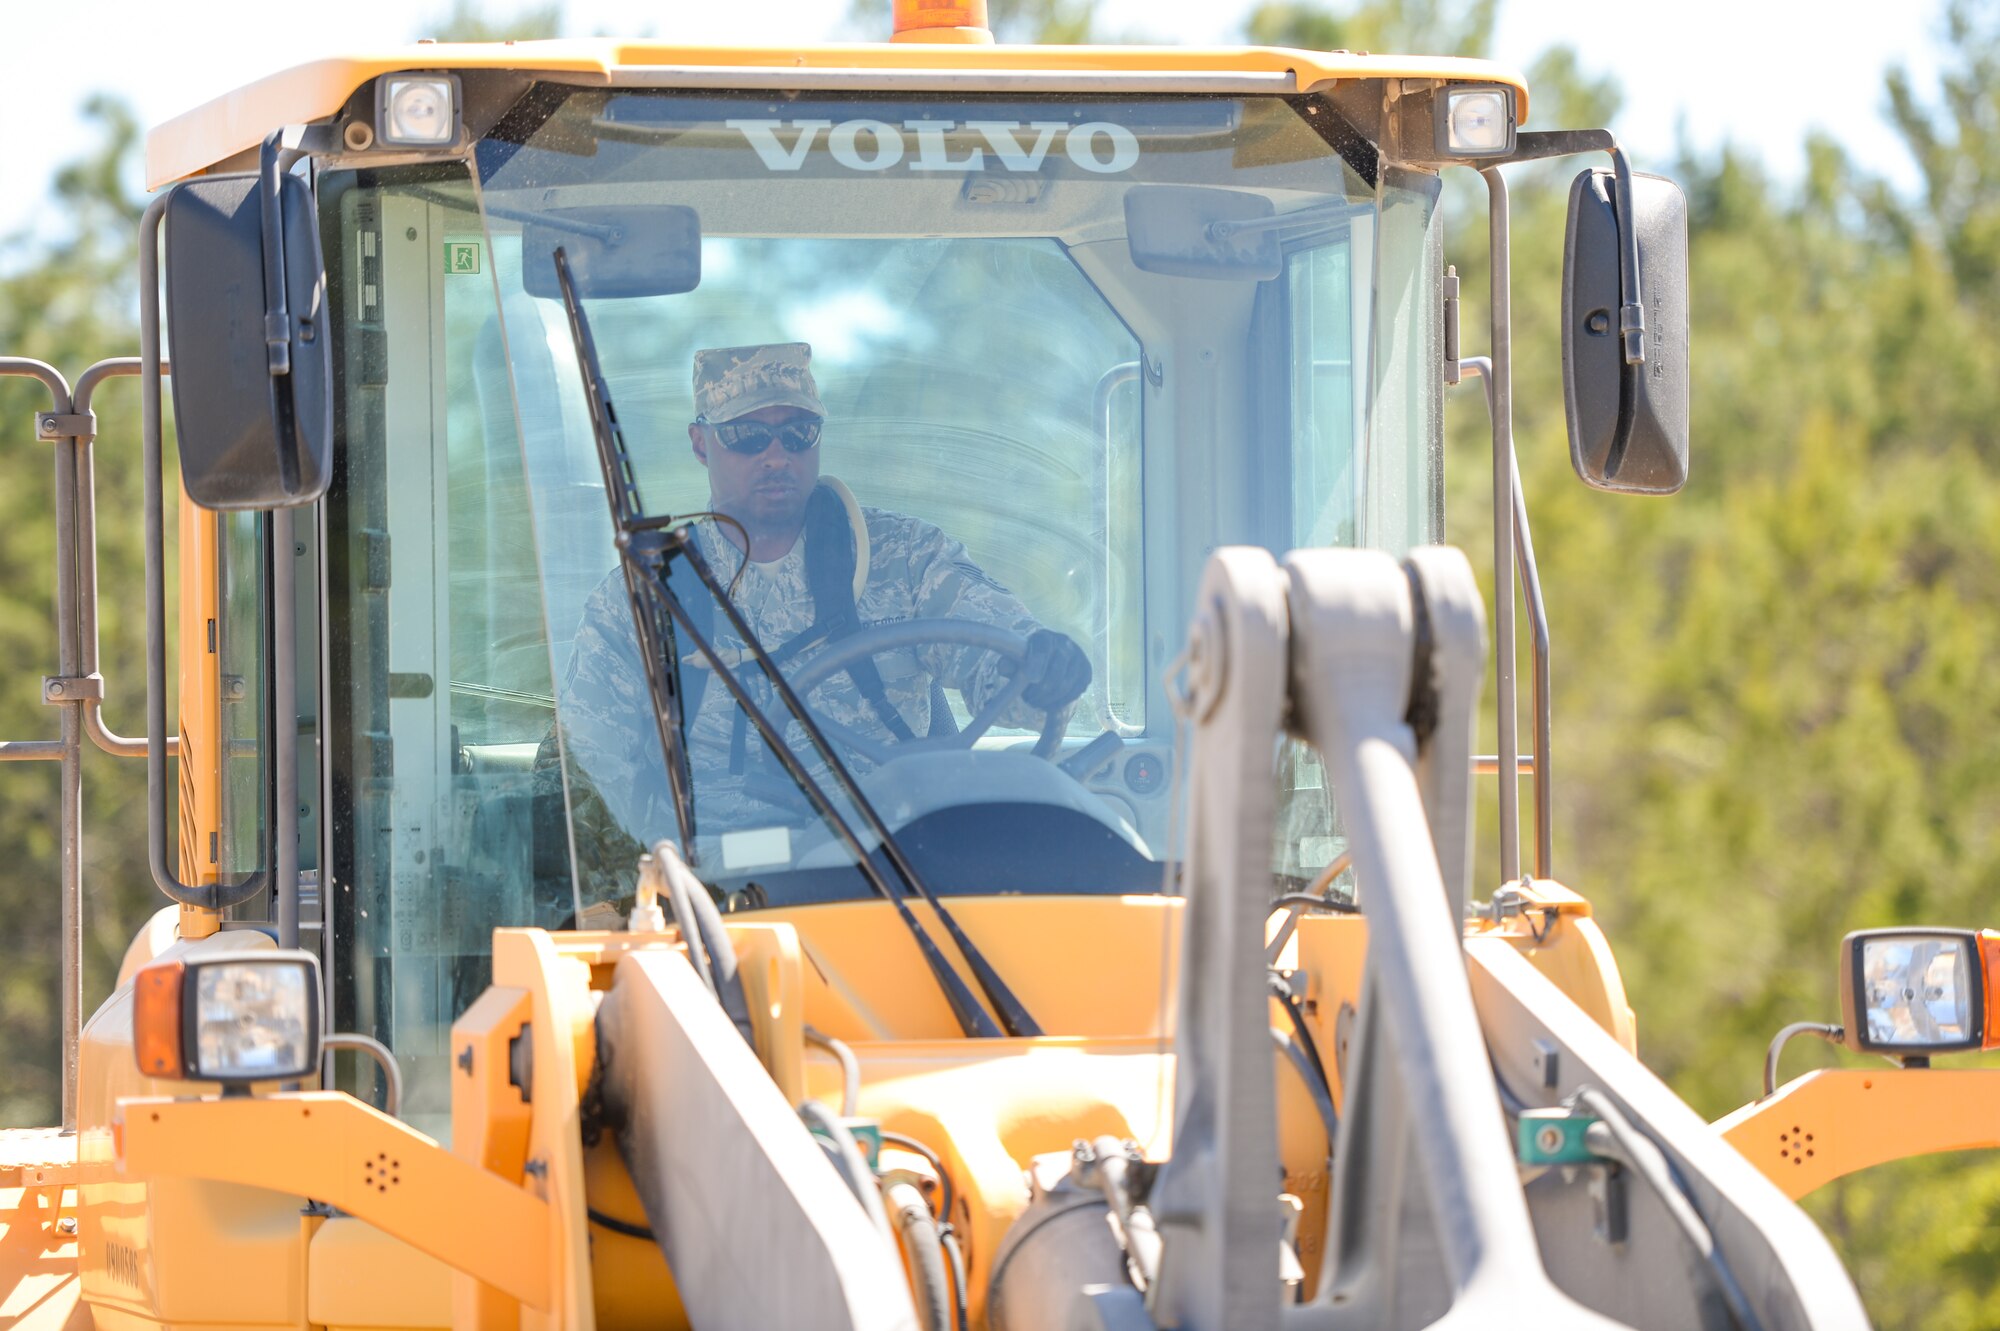 U.S. Air Force Staff Sgt. Marquette Davis, a heavy equipment operator with the 116th Civil Engineering Squadron (CES), Georgia Air National Guard, Robins Air Force Base, Ga., operates a front loader during Silver Flag training at Tyndall Air Force Base, Fla., April 16, 2014. During the weeklong course, Guardsmen from the 116th CES along with 219 Airmen from multiple U.S. Air Force active duty, Reserve and Air National Guard units trained on building and maintaining bare-base operations at a simulated forward-deployed location. In addition, they honed their combat and survival skills, repaired simulated bomb-damaged runways, set up base facilities and established various critical base operating support capabilities. Thirty-four Airmen from the 116th CES attended the exercise that consisted of extensive classroom and hands-on training culminating in an evaluation of learned skills on the last day of class. (U.S. Air National Guard photo by Master Sgt. Roger Parsons/Released)